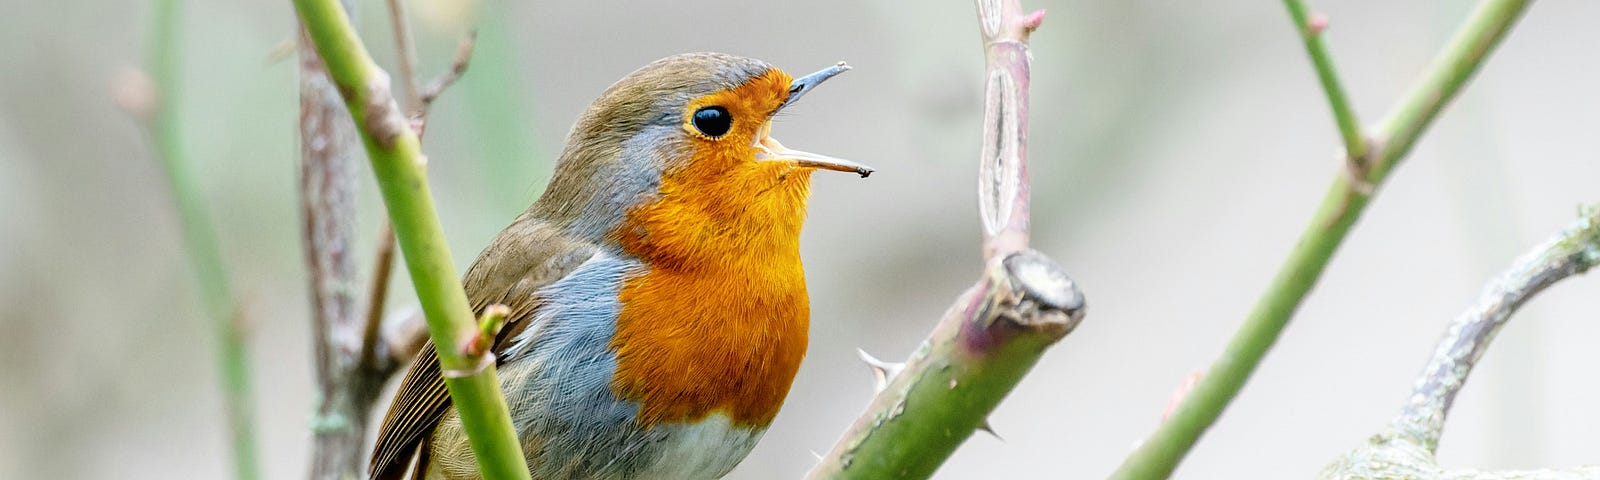 A robin singing perched on a branch.